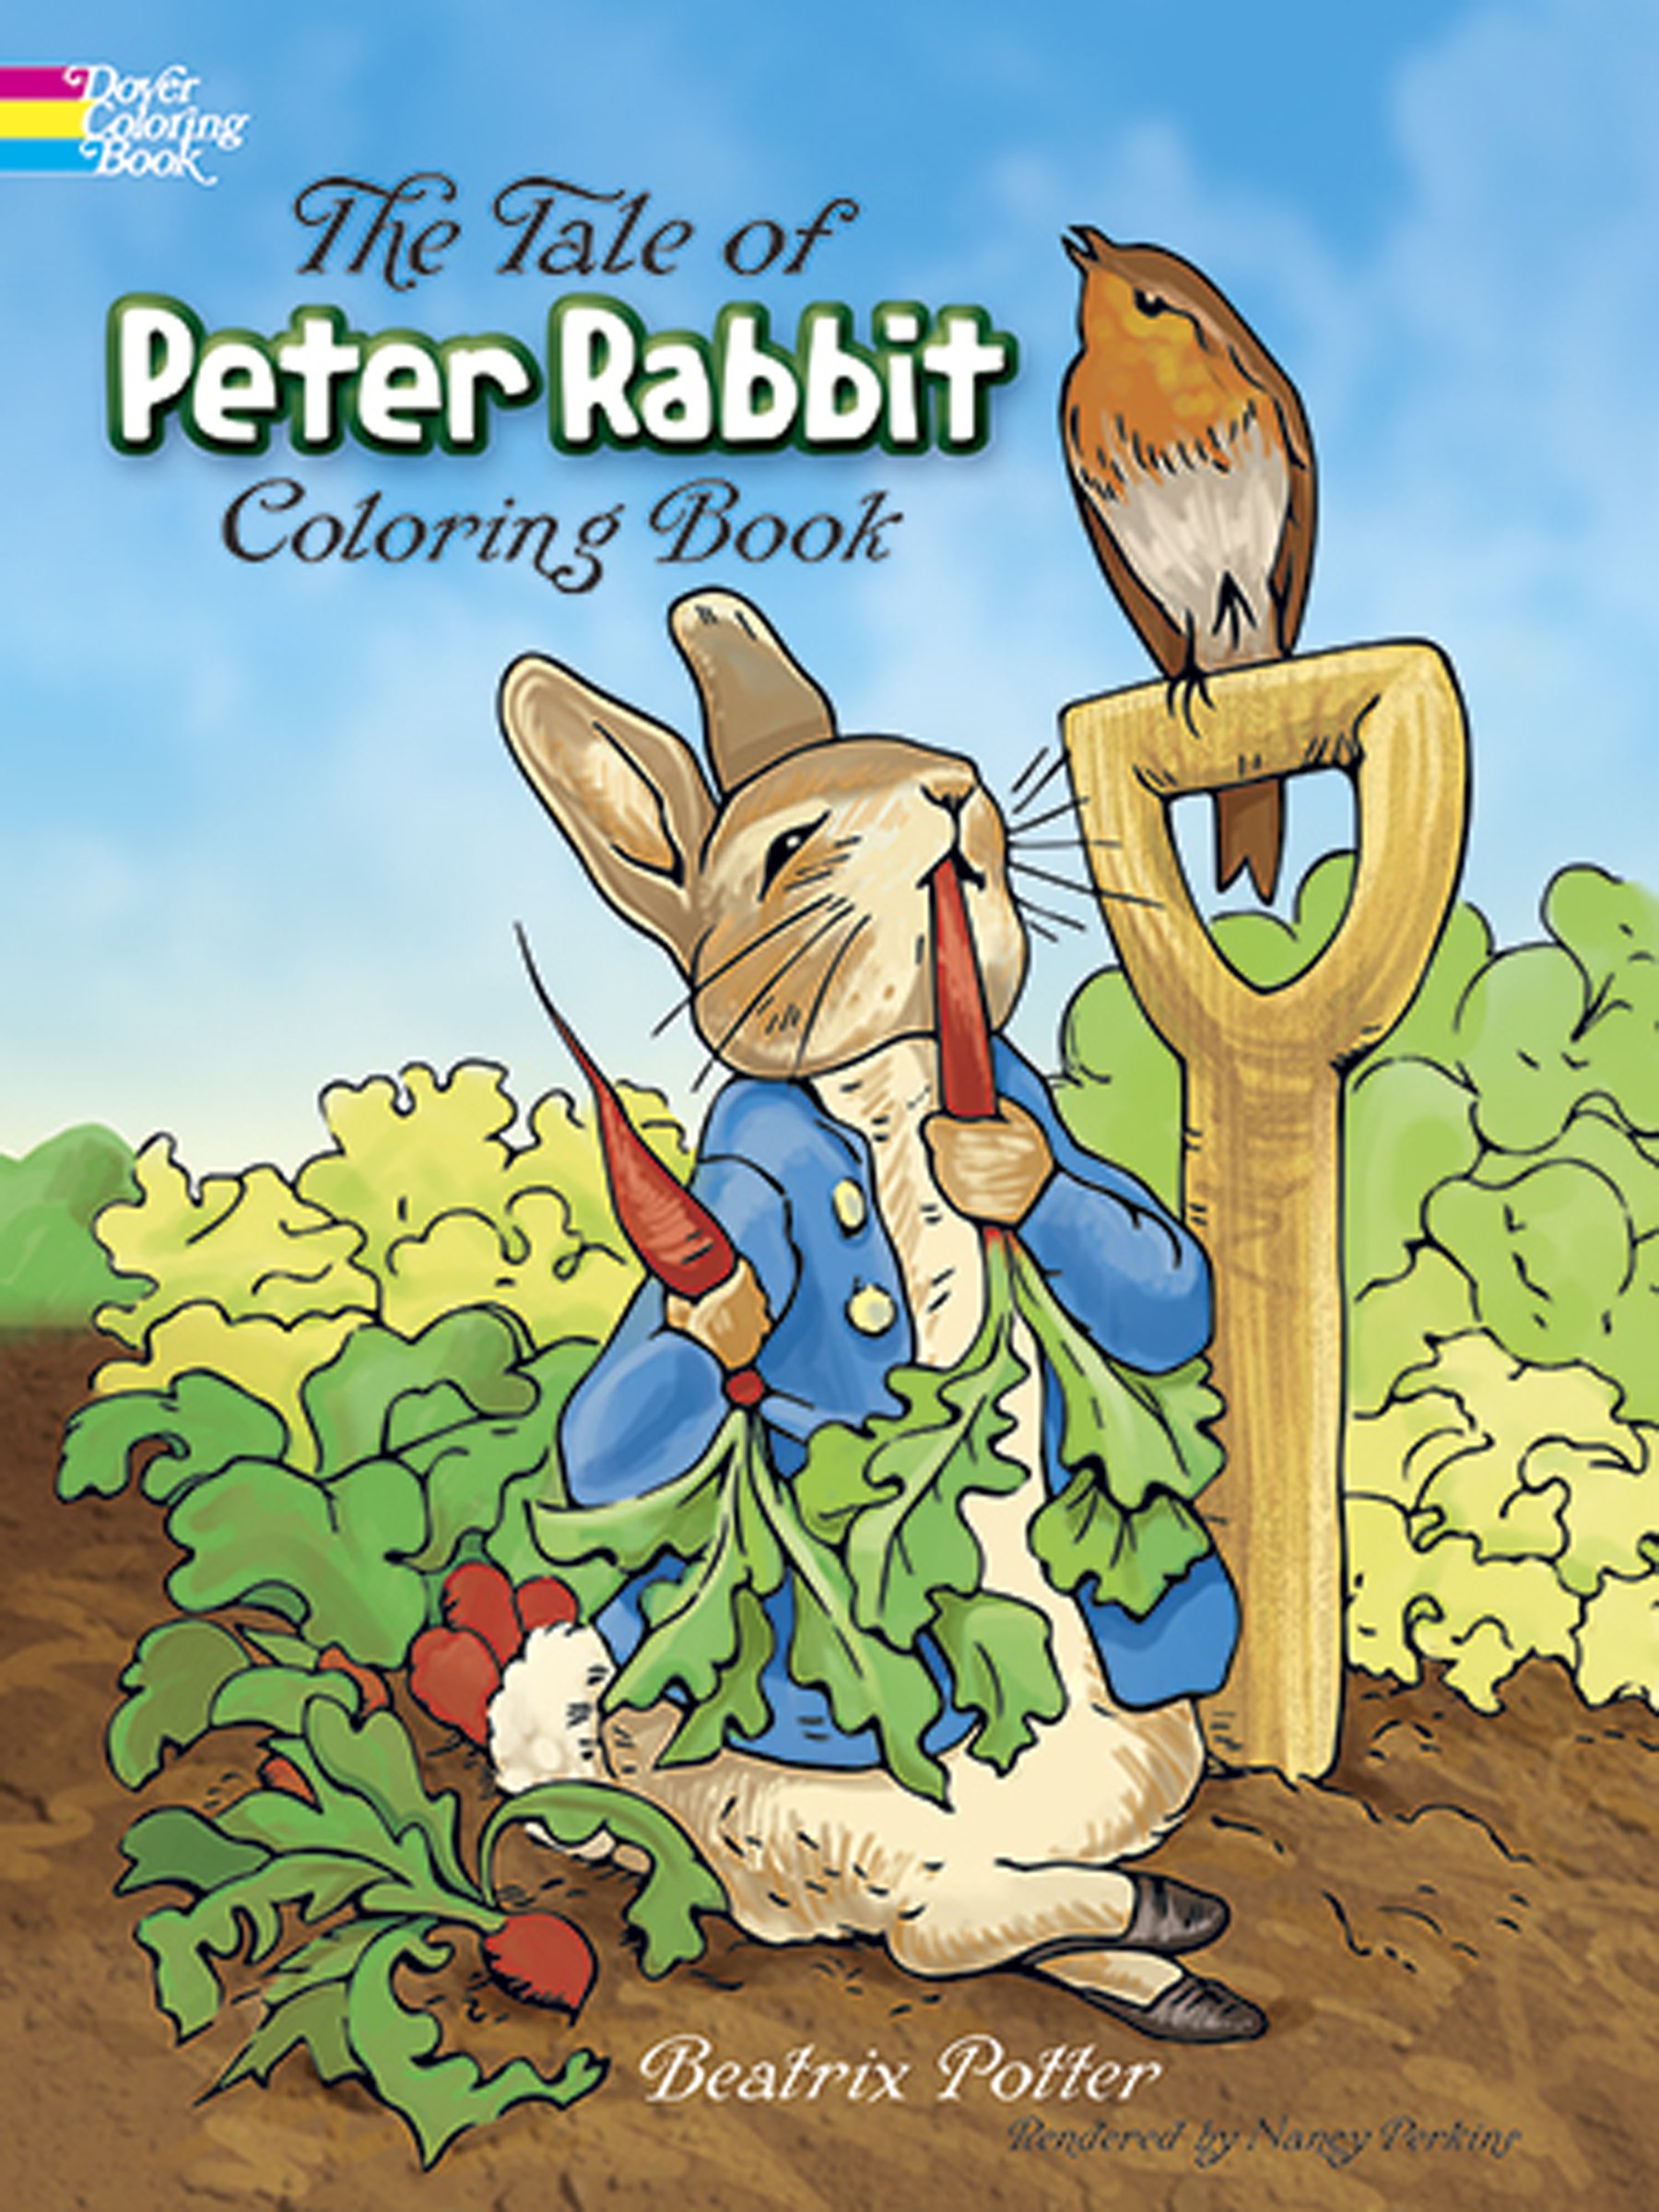 The tale of peter rabbit coloring book the man shop the man library museum